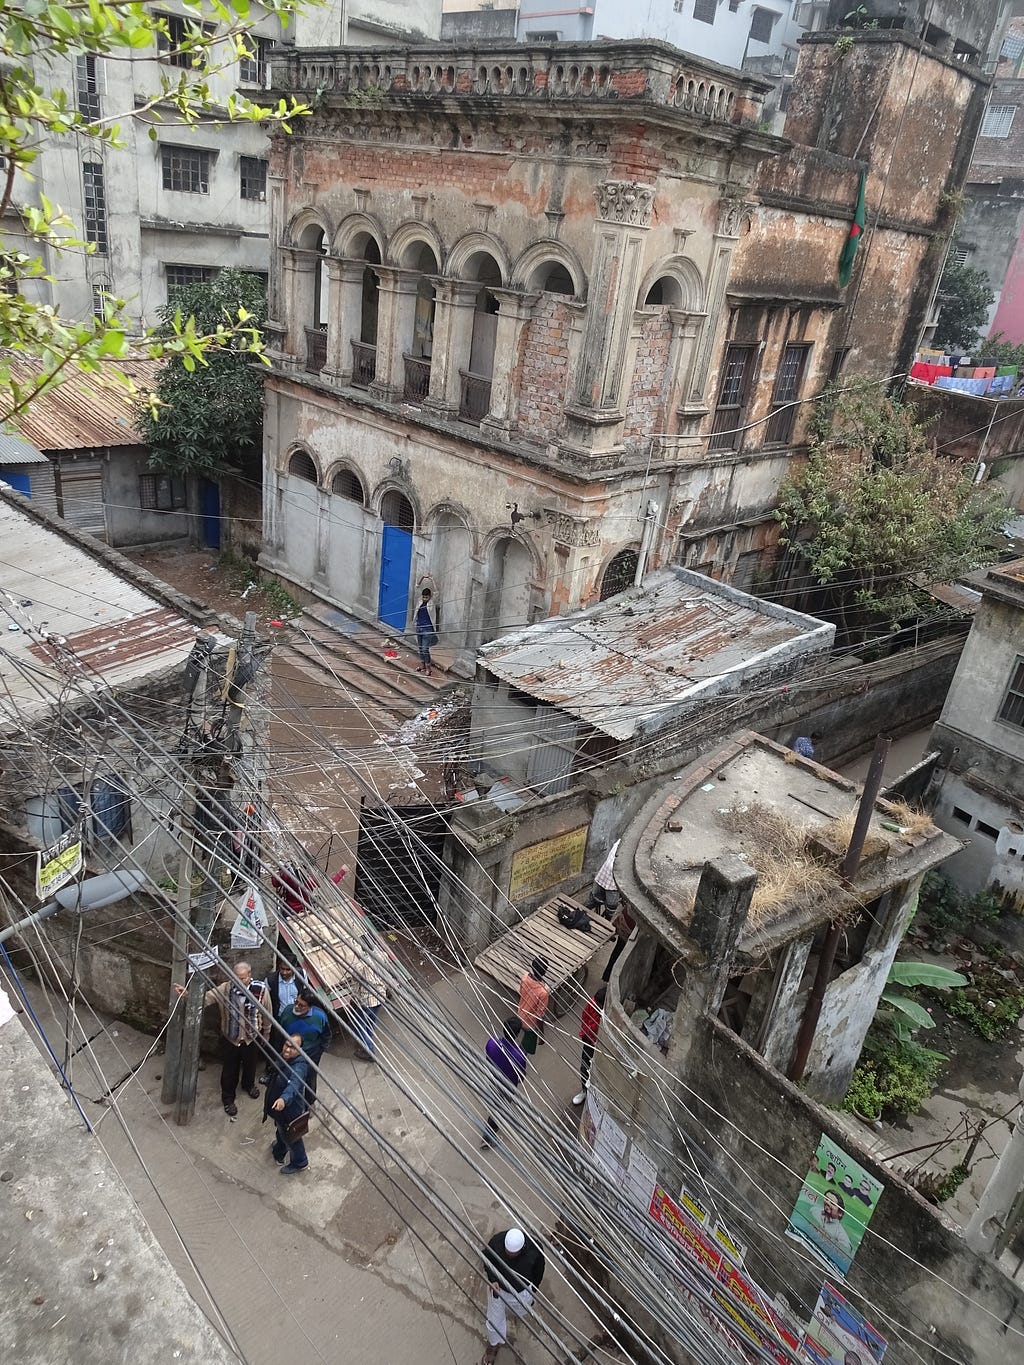 Dhaka city pic: Old houses and streets